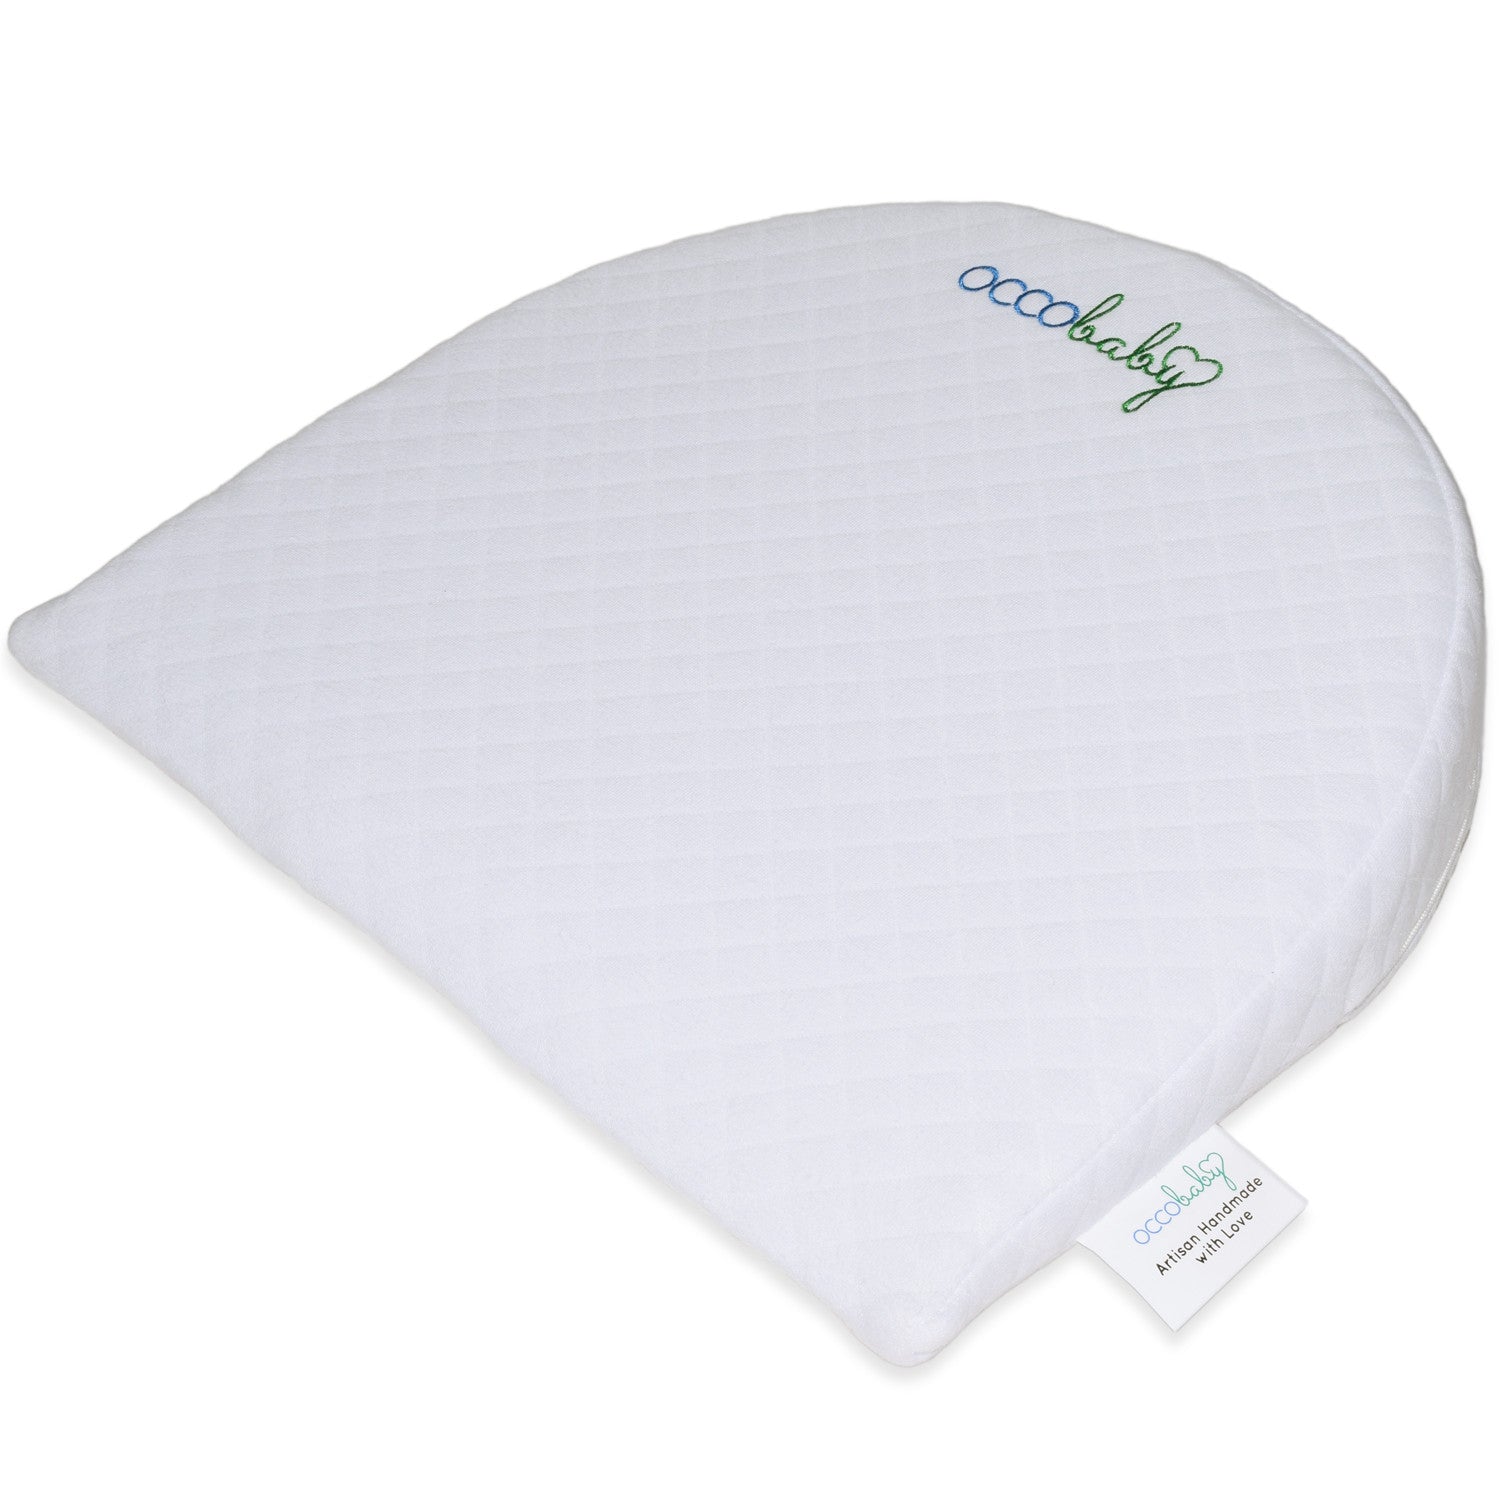 OCCObaby Universal Bassinet Wedge Pillow